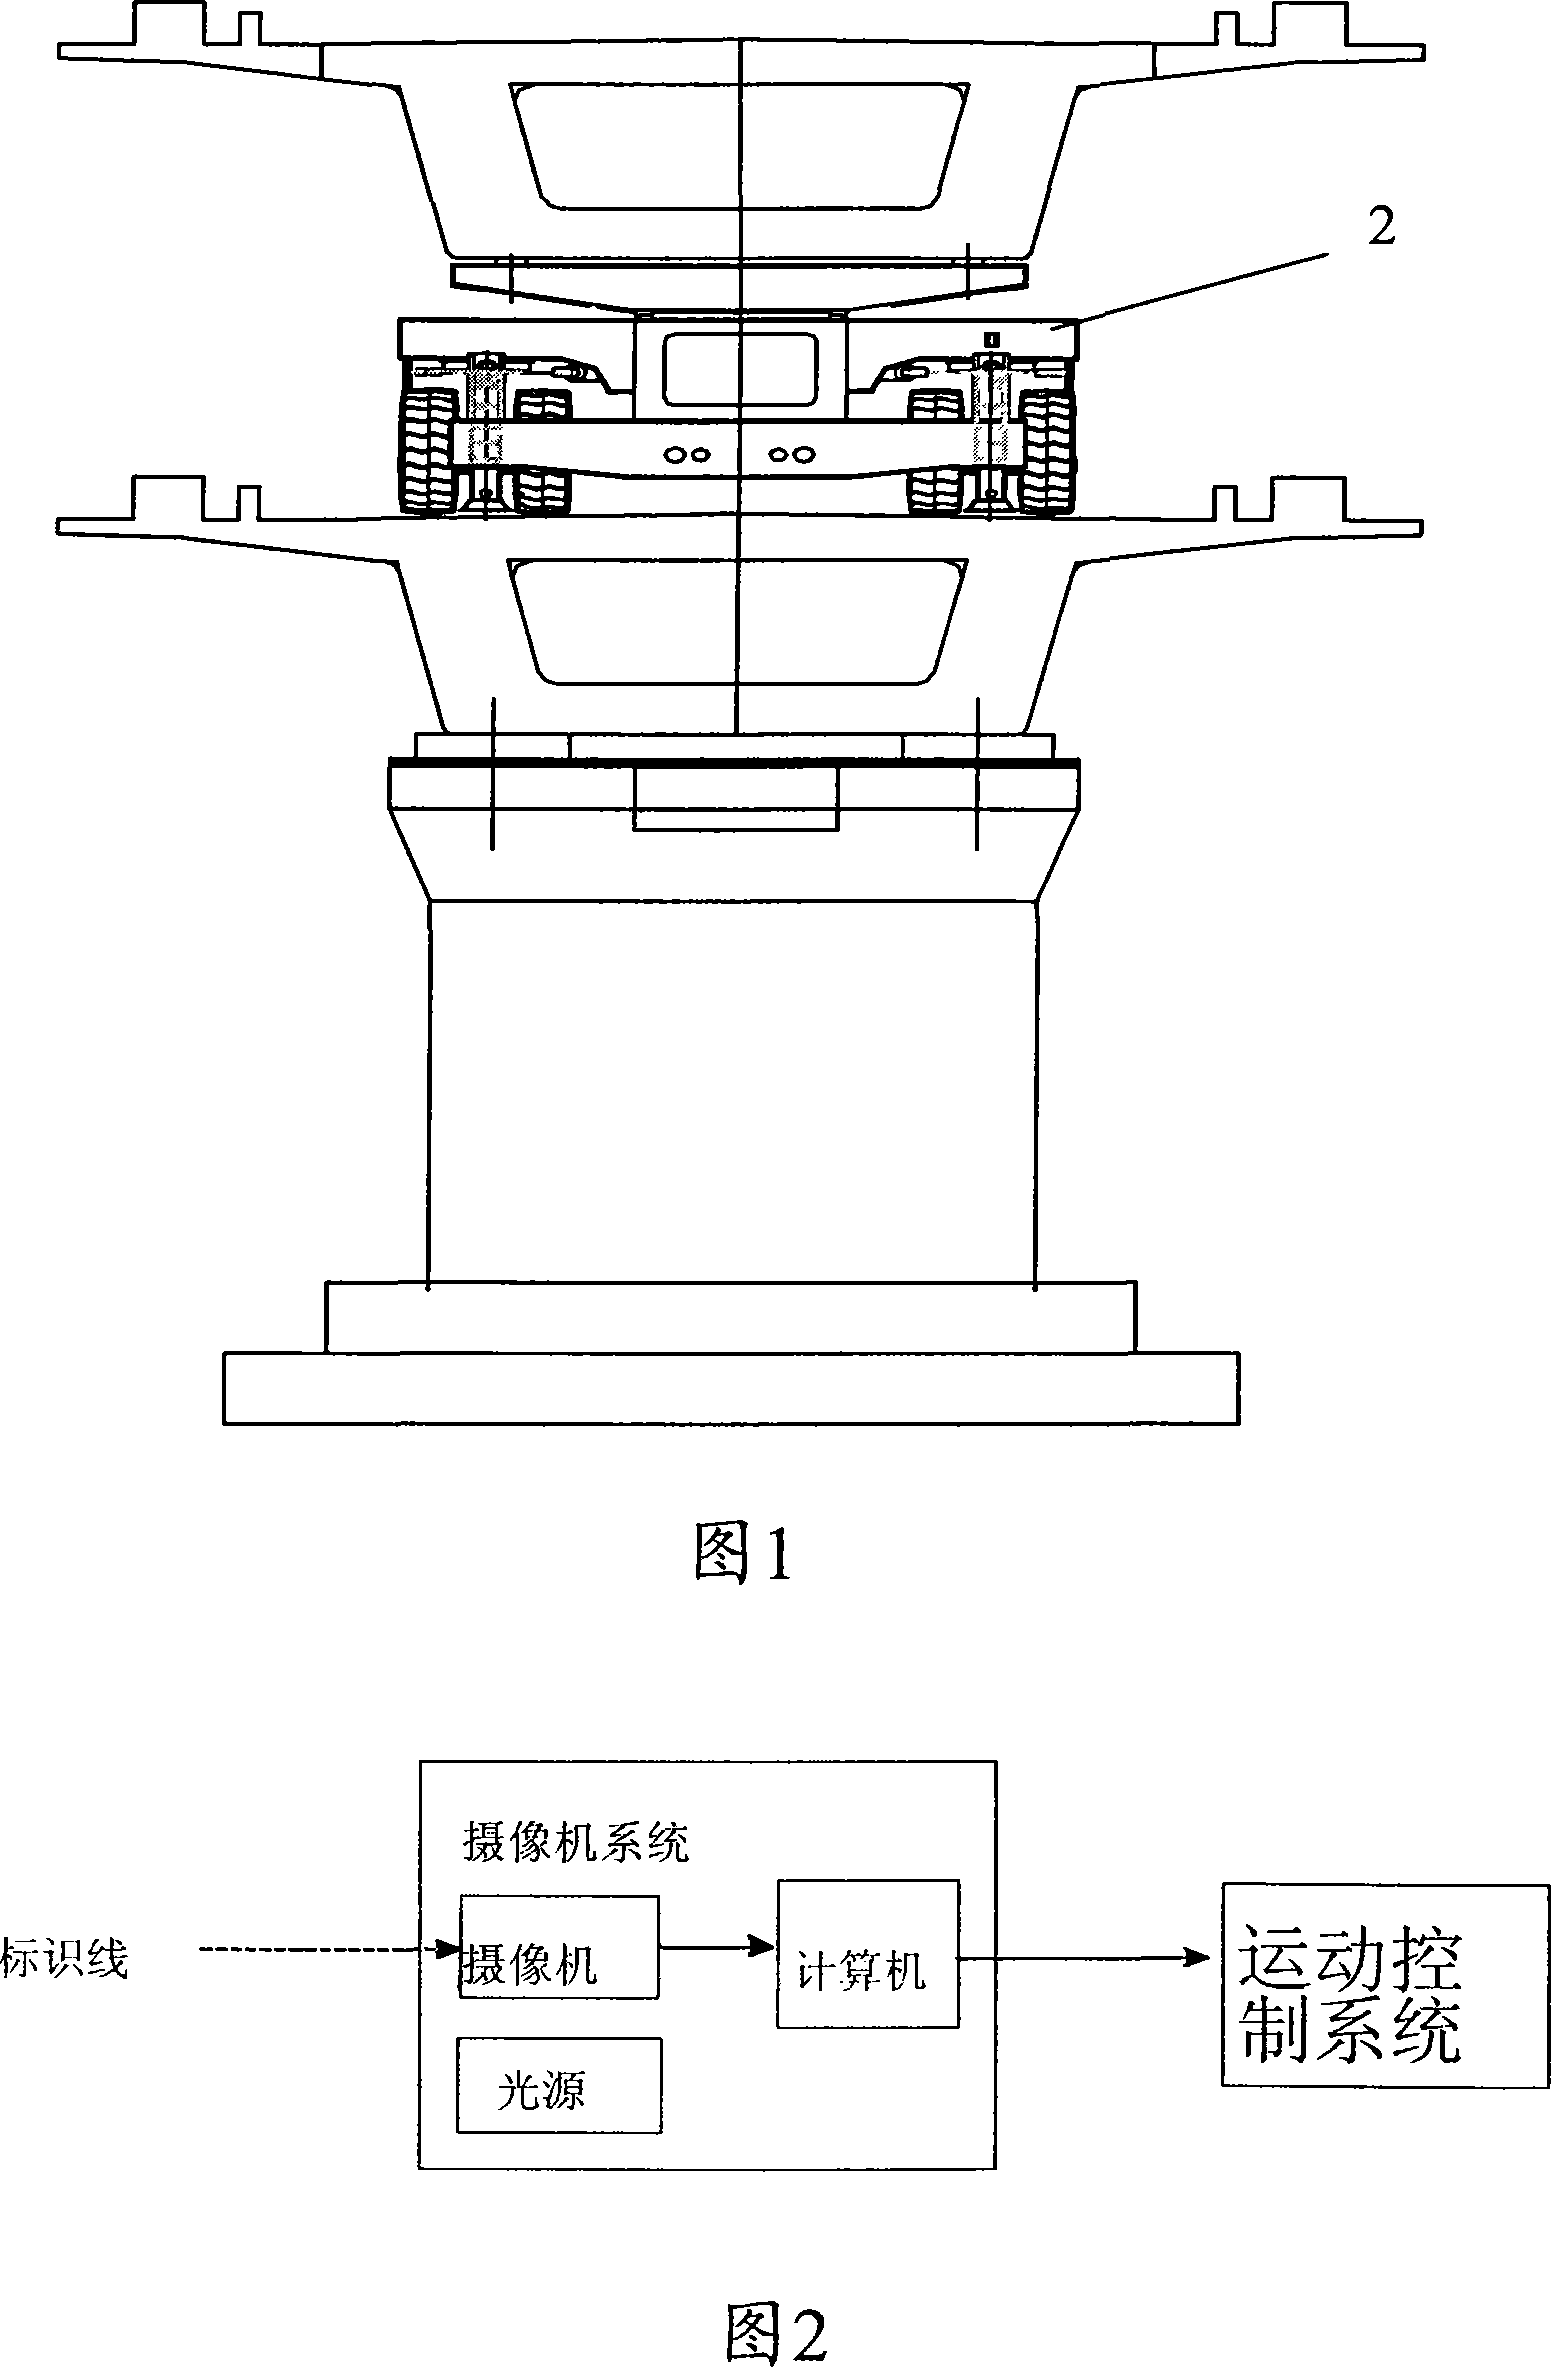 Control method for automatic drive of large engineering vehicle and system thereof